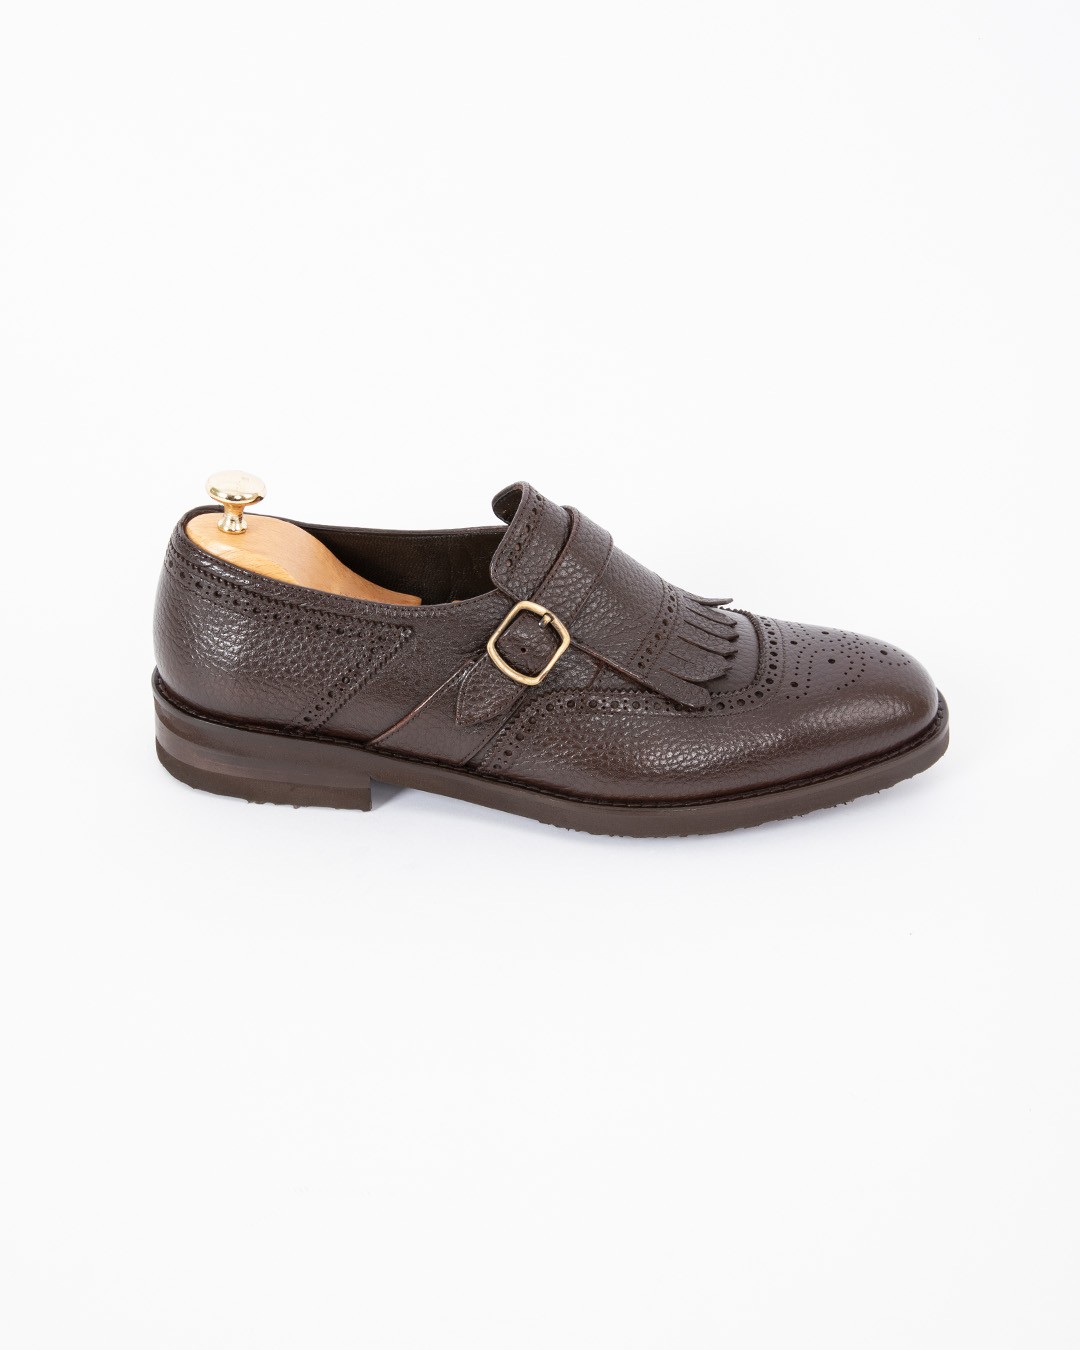 Buckled Shoes - Brown